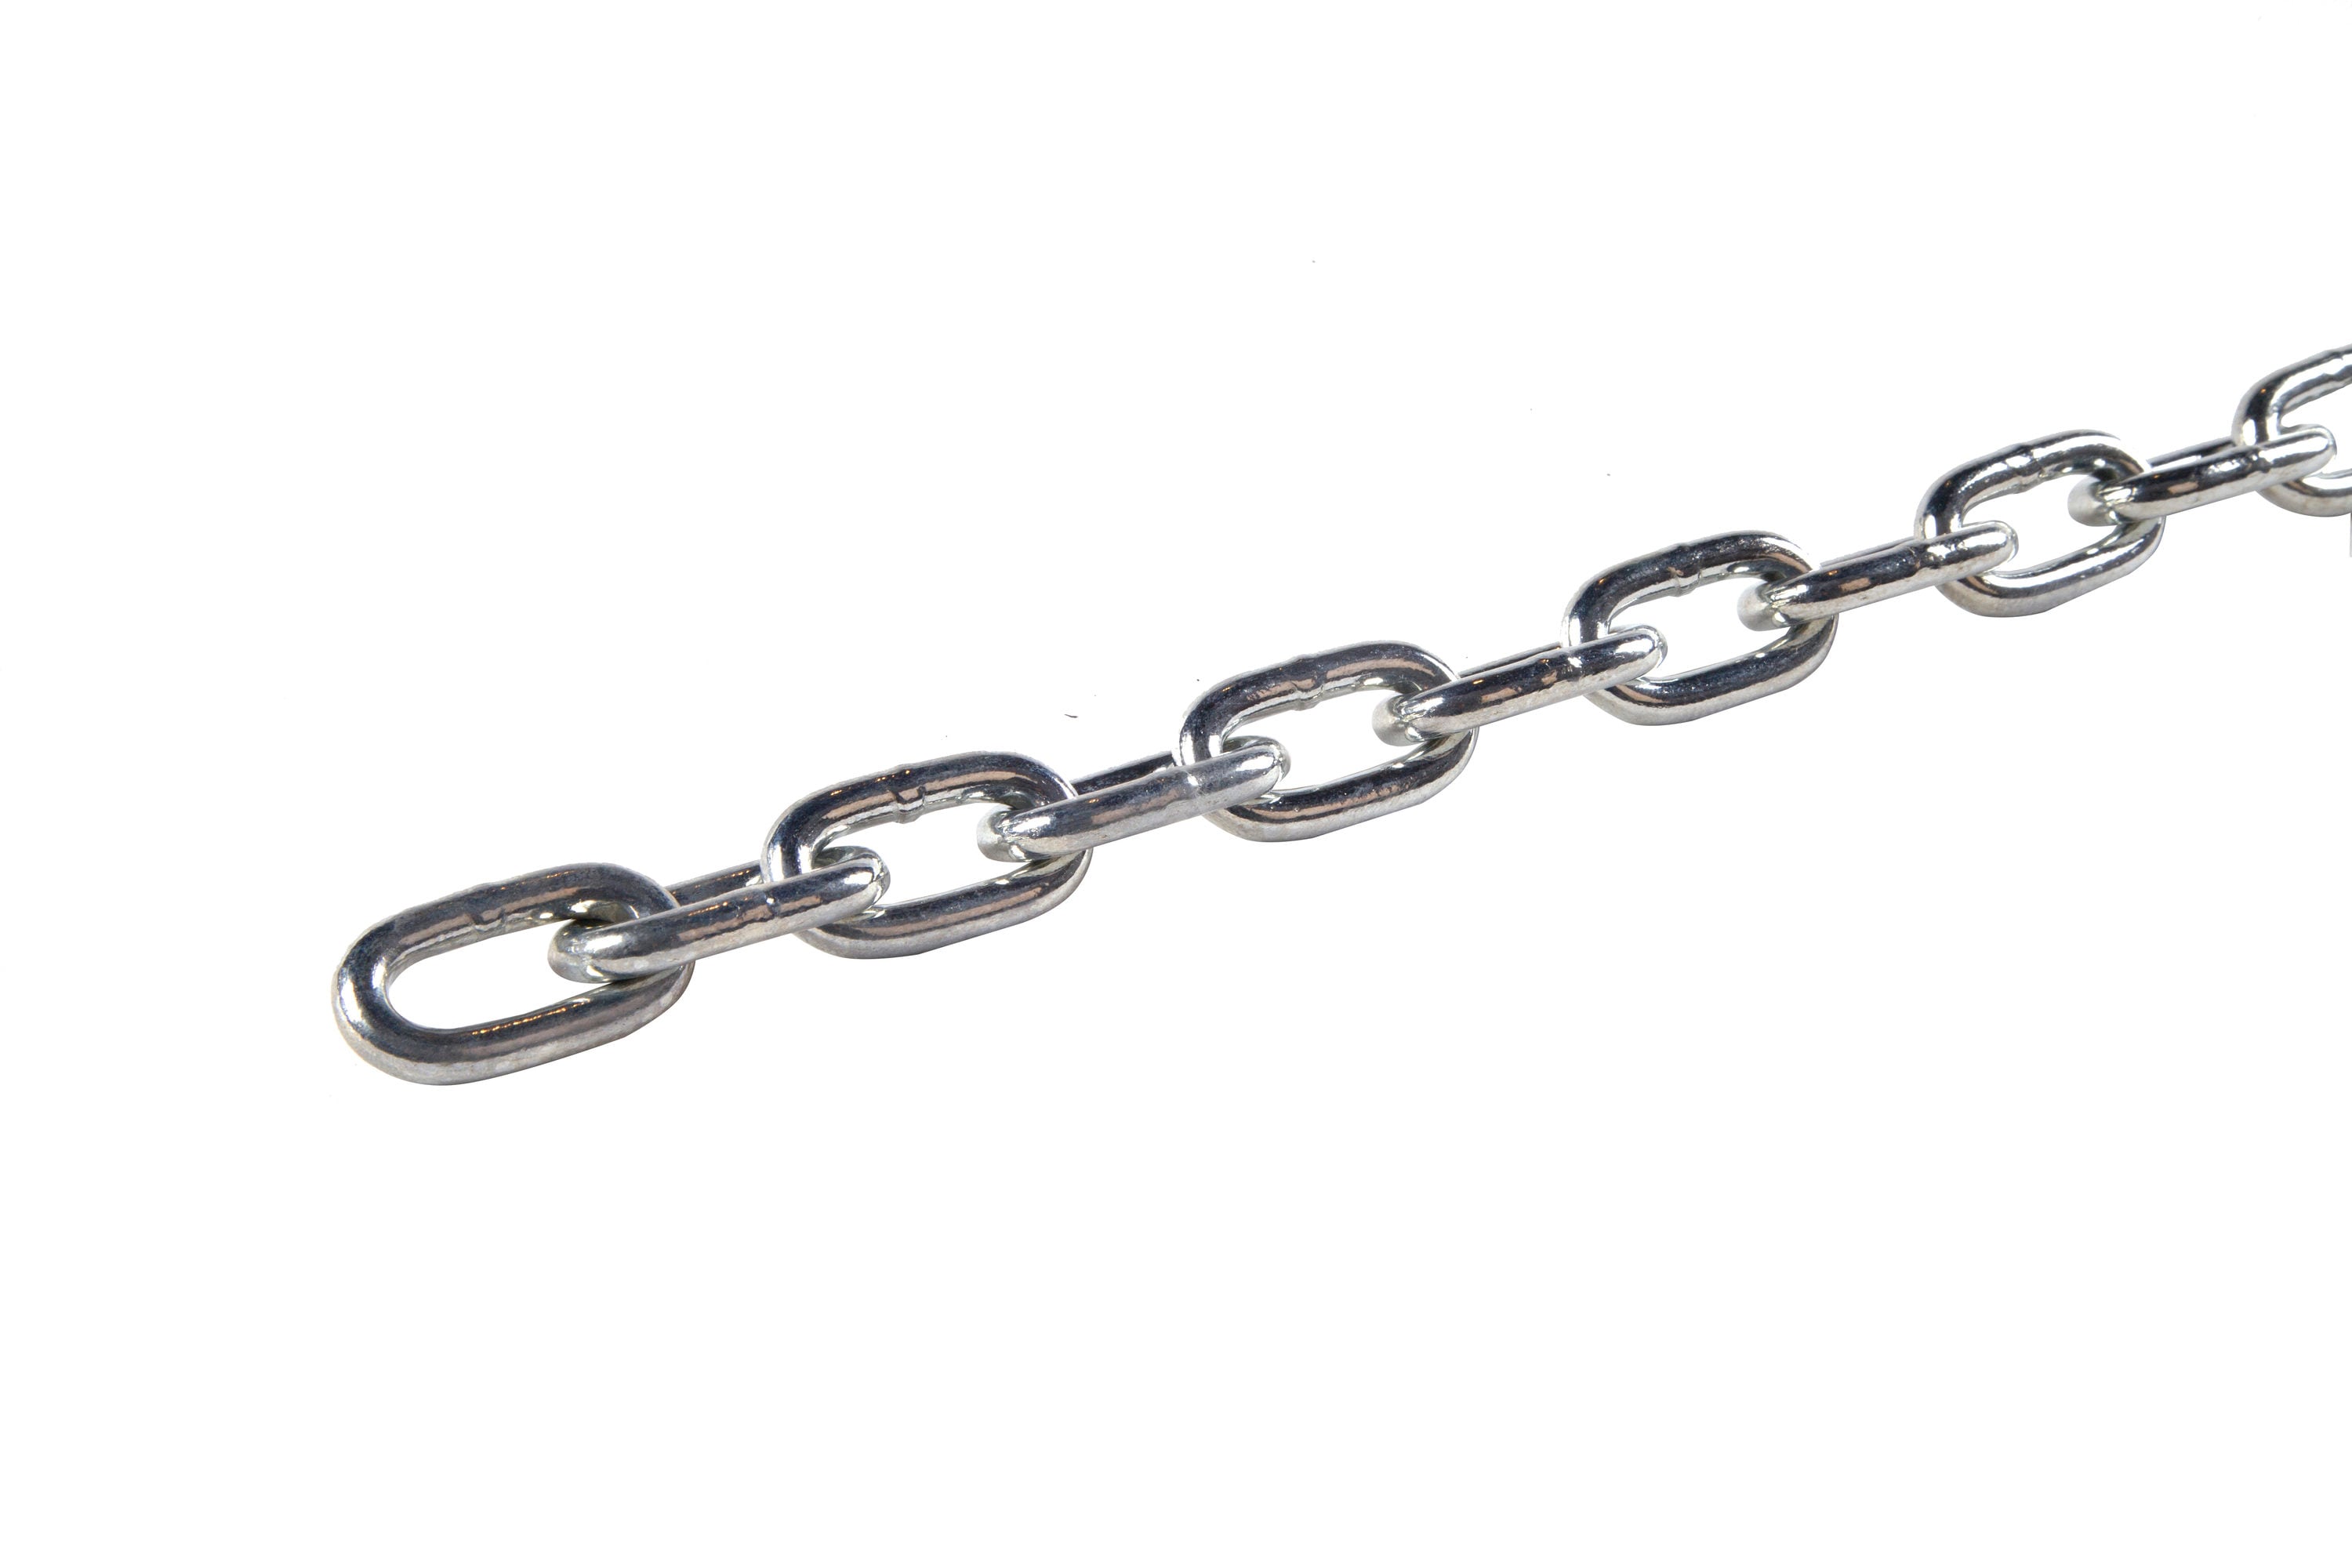 Stainless Steel 316 Chain 3mm or 1/8 Medium Link Chain by the foot